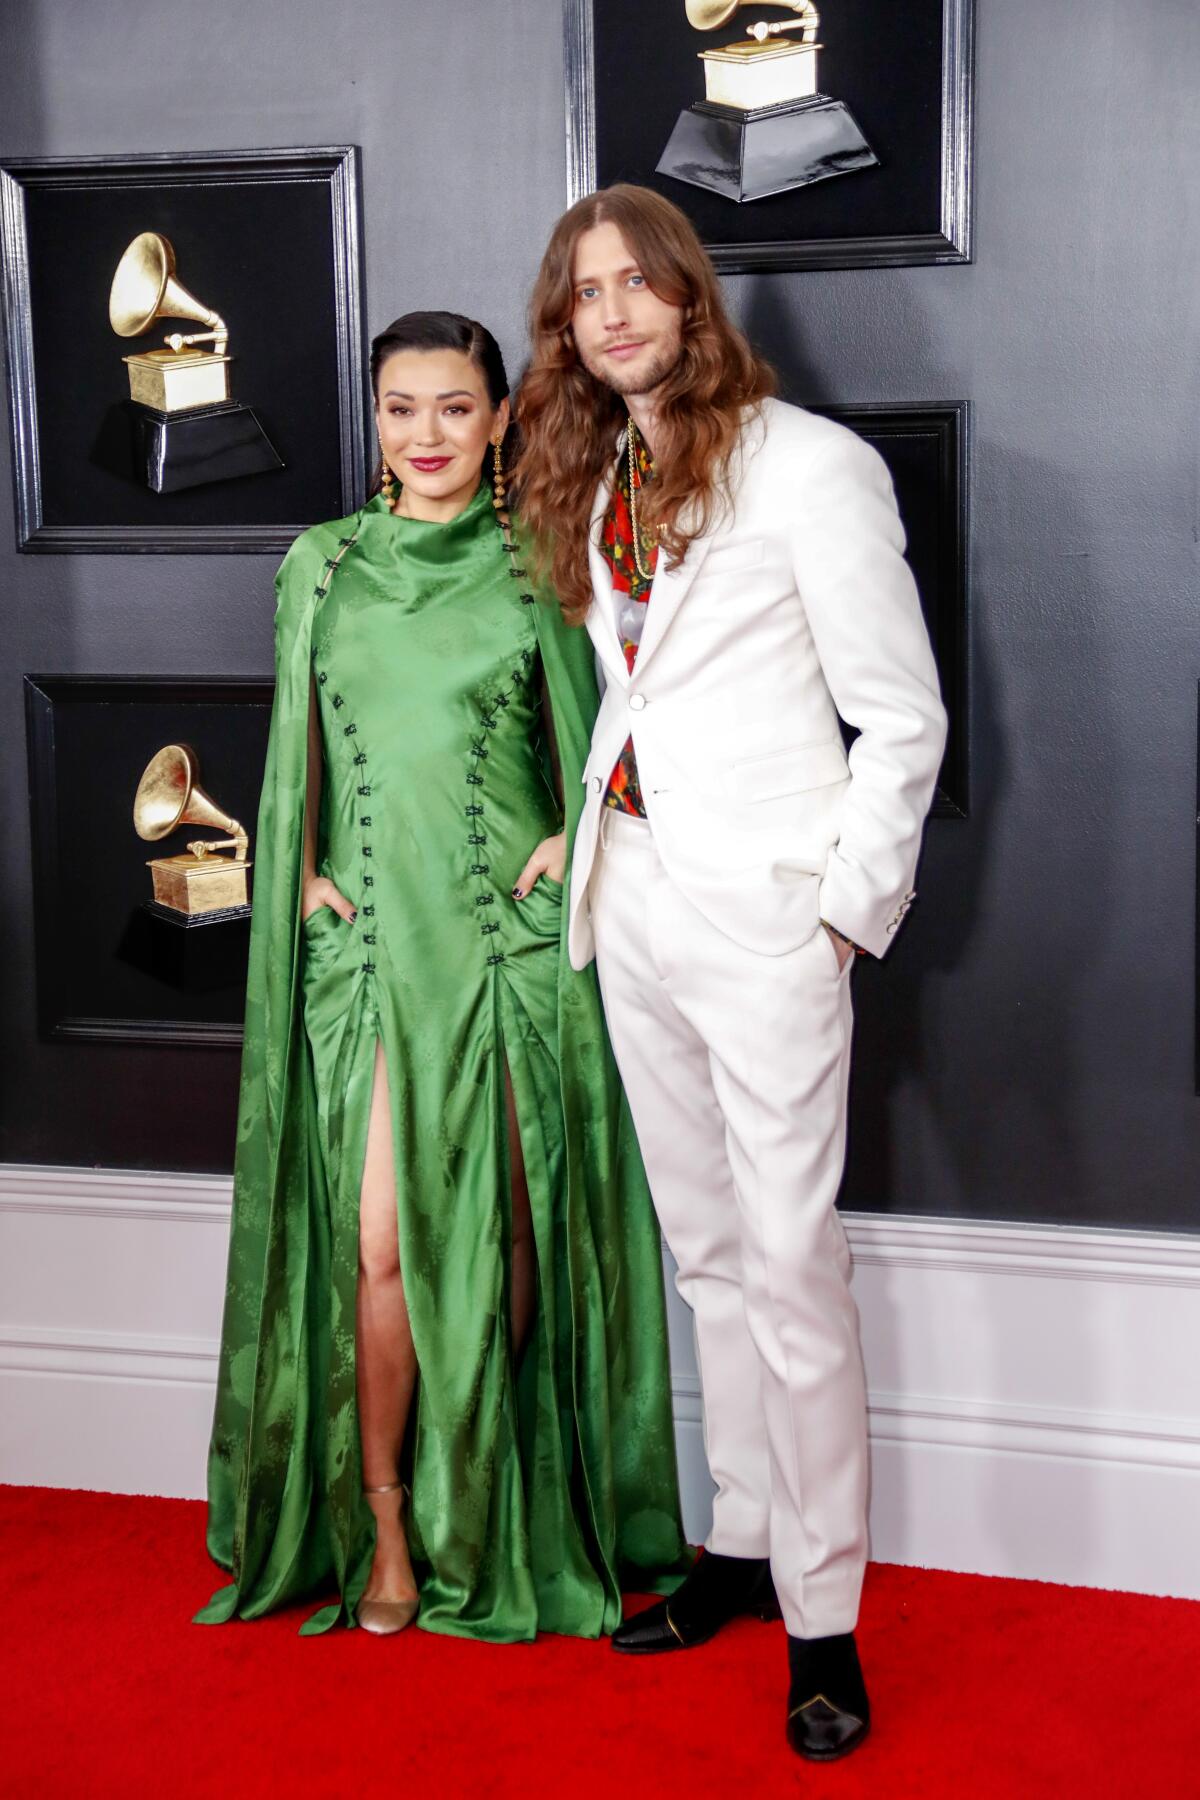 Serena McKinney, in a green dress, and Ludwig Göransson, in a white suit, on the red carpet at the 61st Grammy Awards.